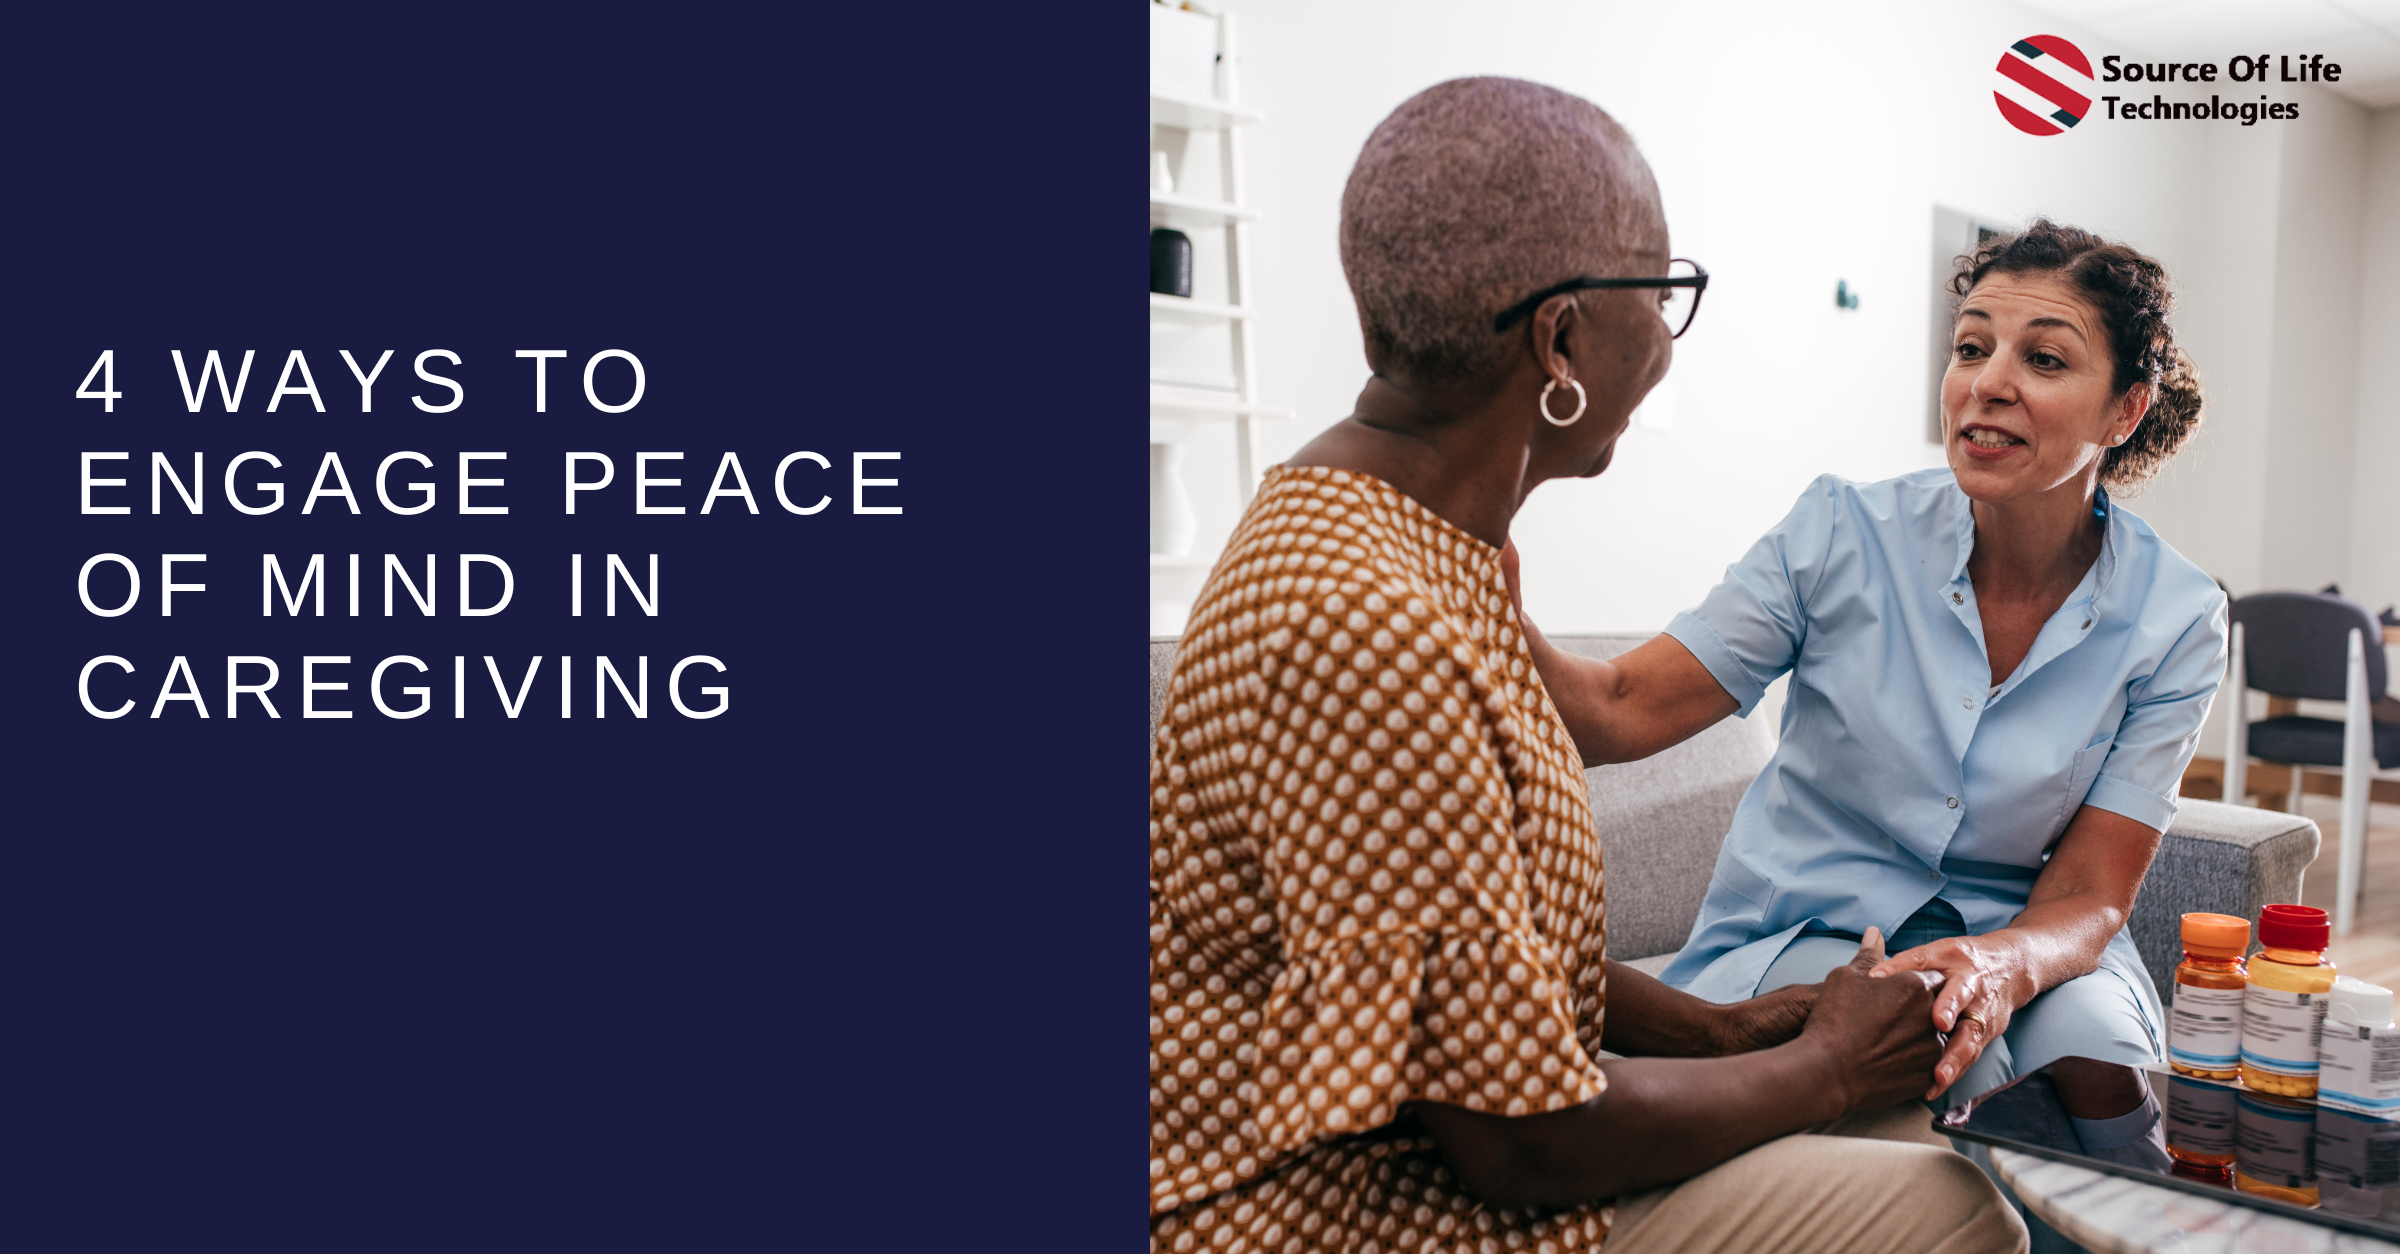 4 Ways to Engage Peace of Mind in Caregiving